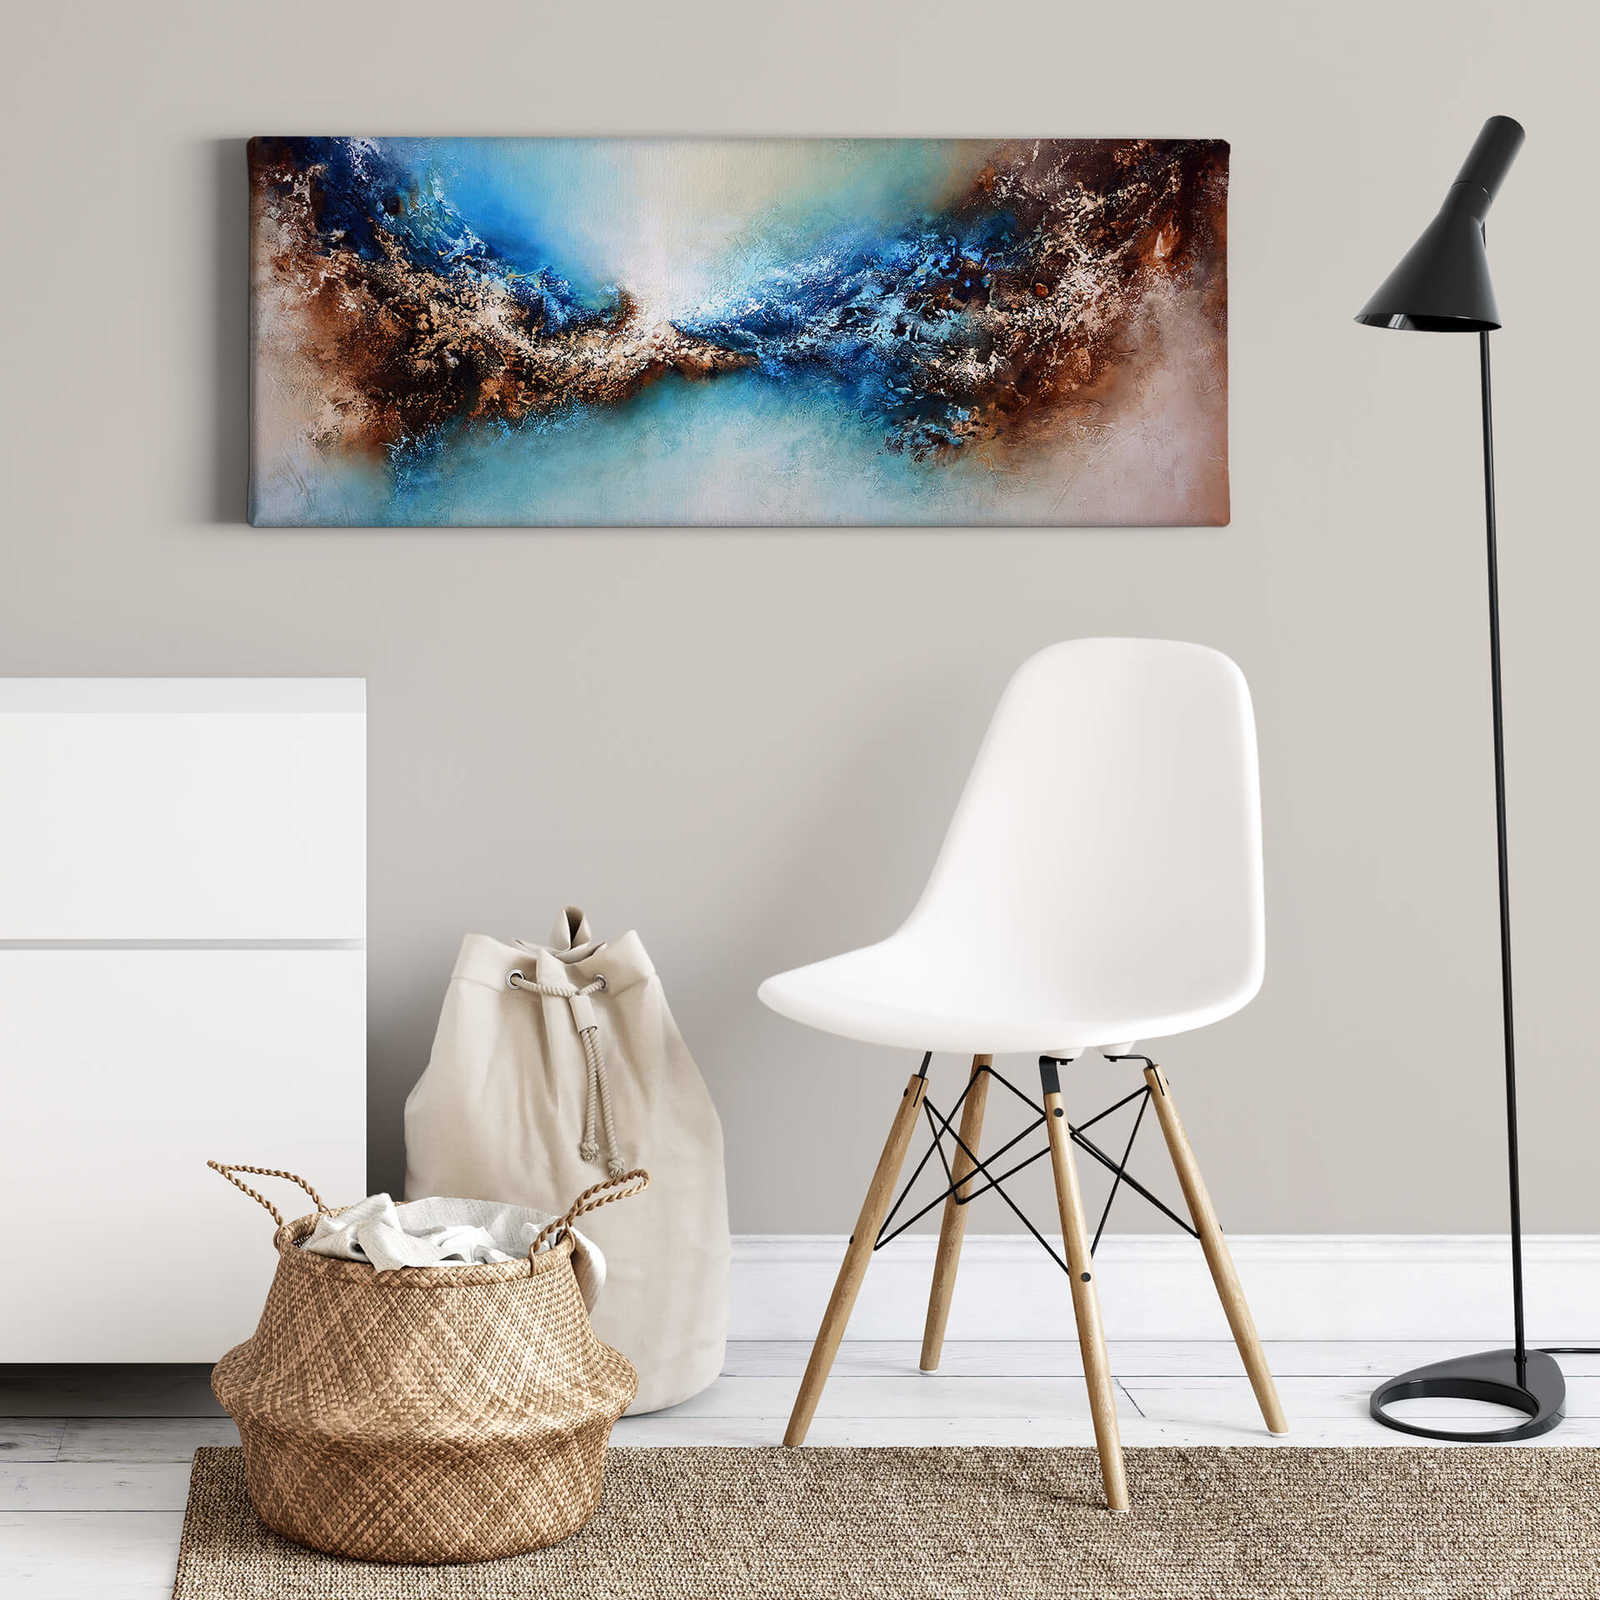             Panoramic canvas print "Blended 02" galaxy by Fedau
        